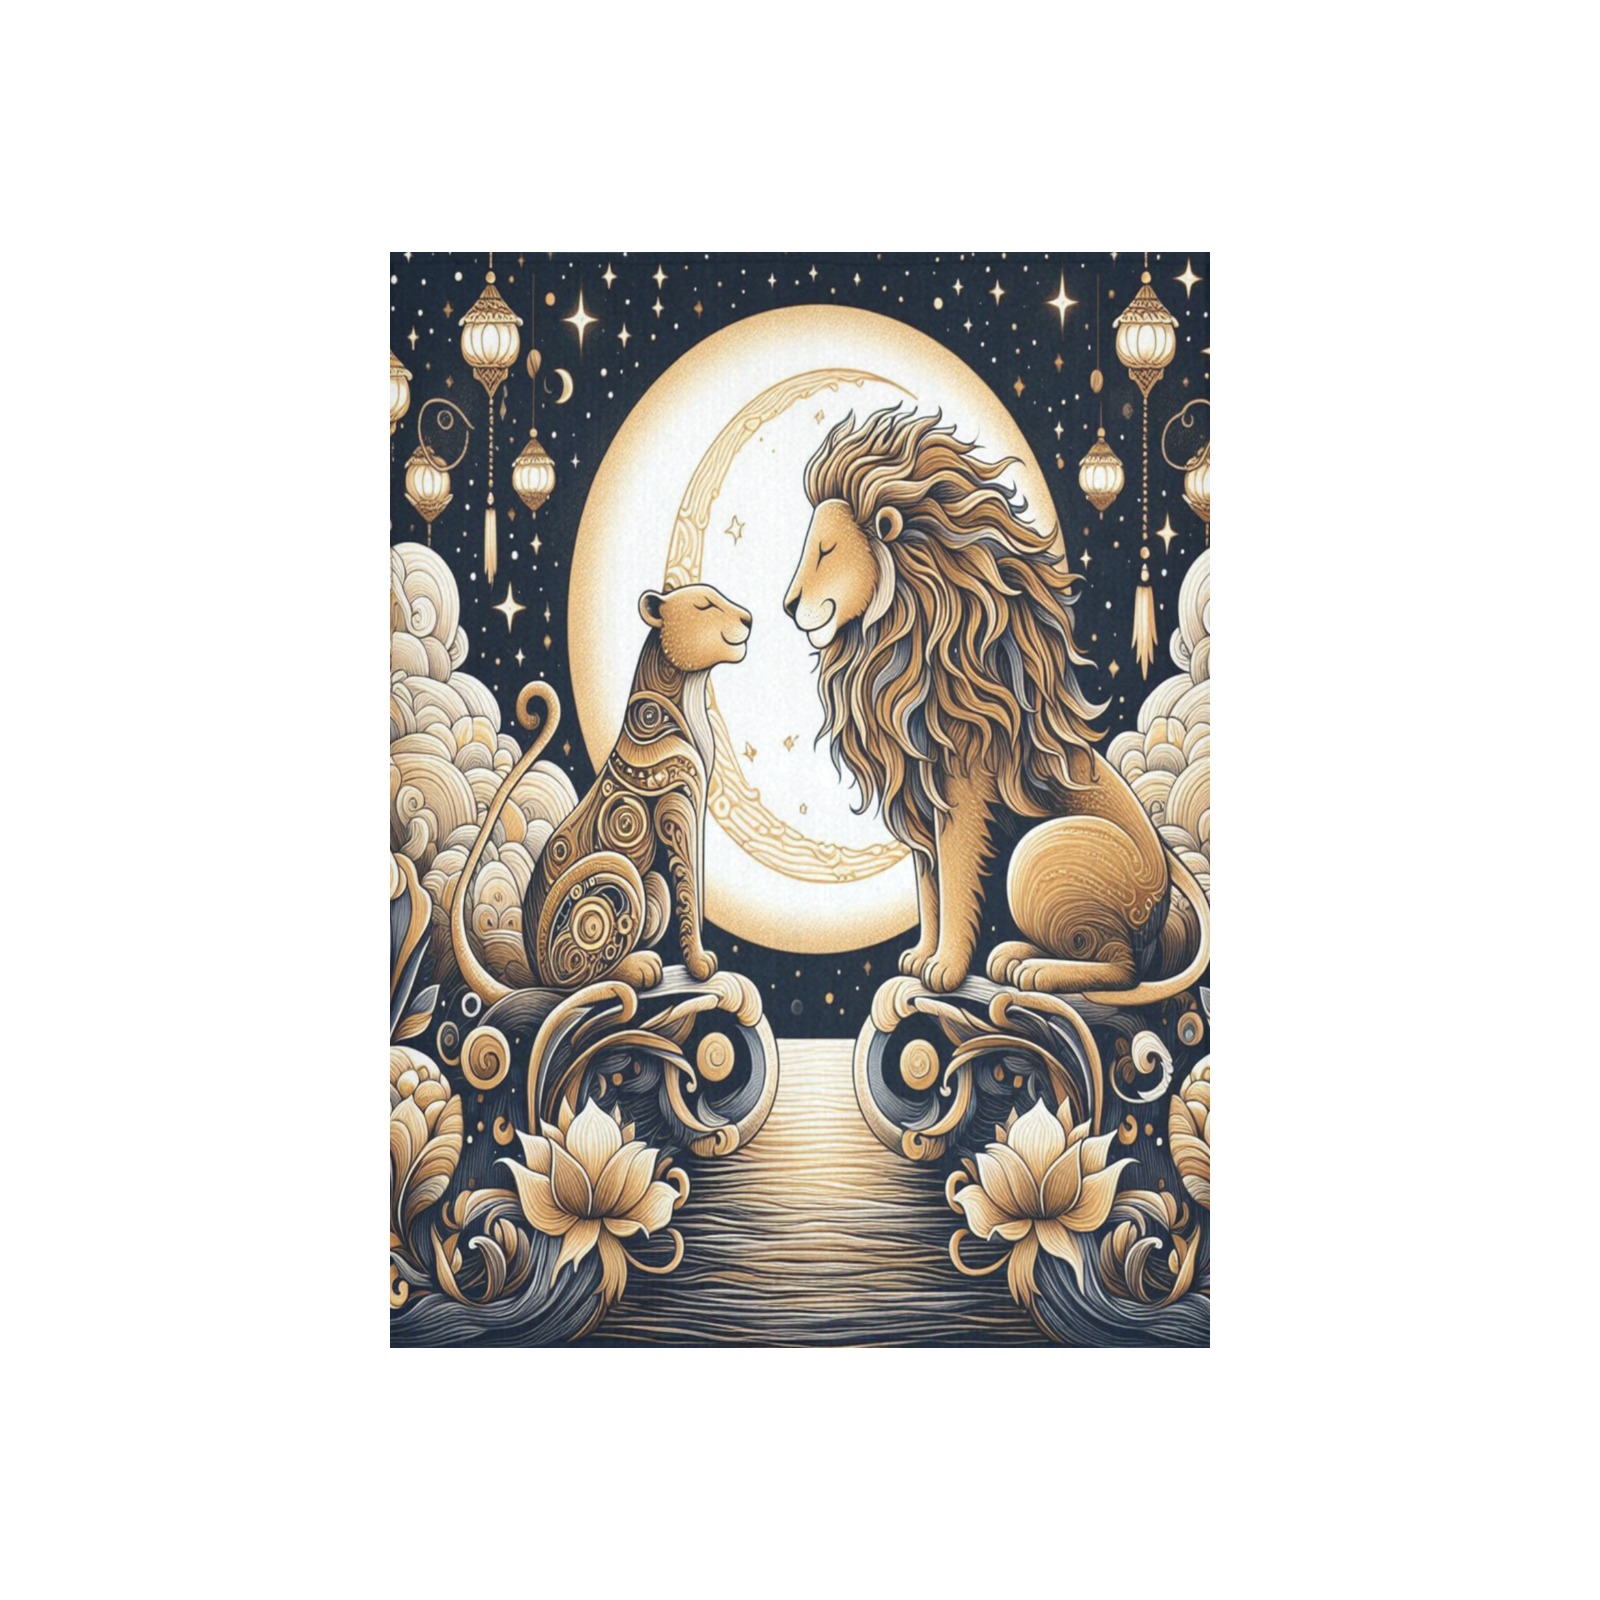 Moonlight Lions Love Polyester Peach Skin Wall Tapestry 30"x 40"